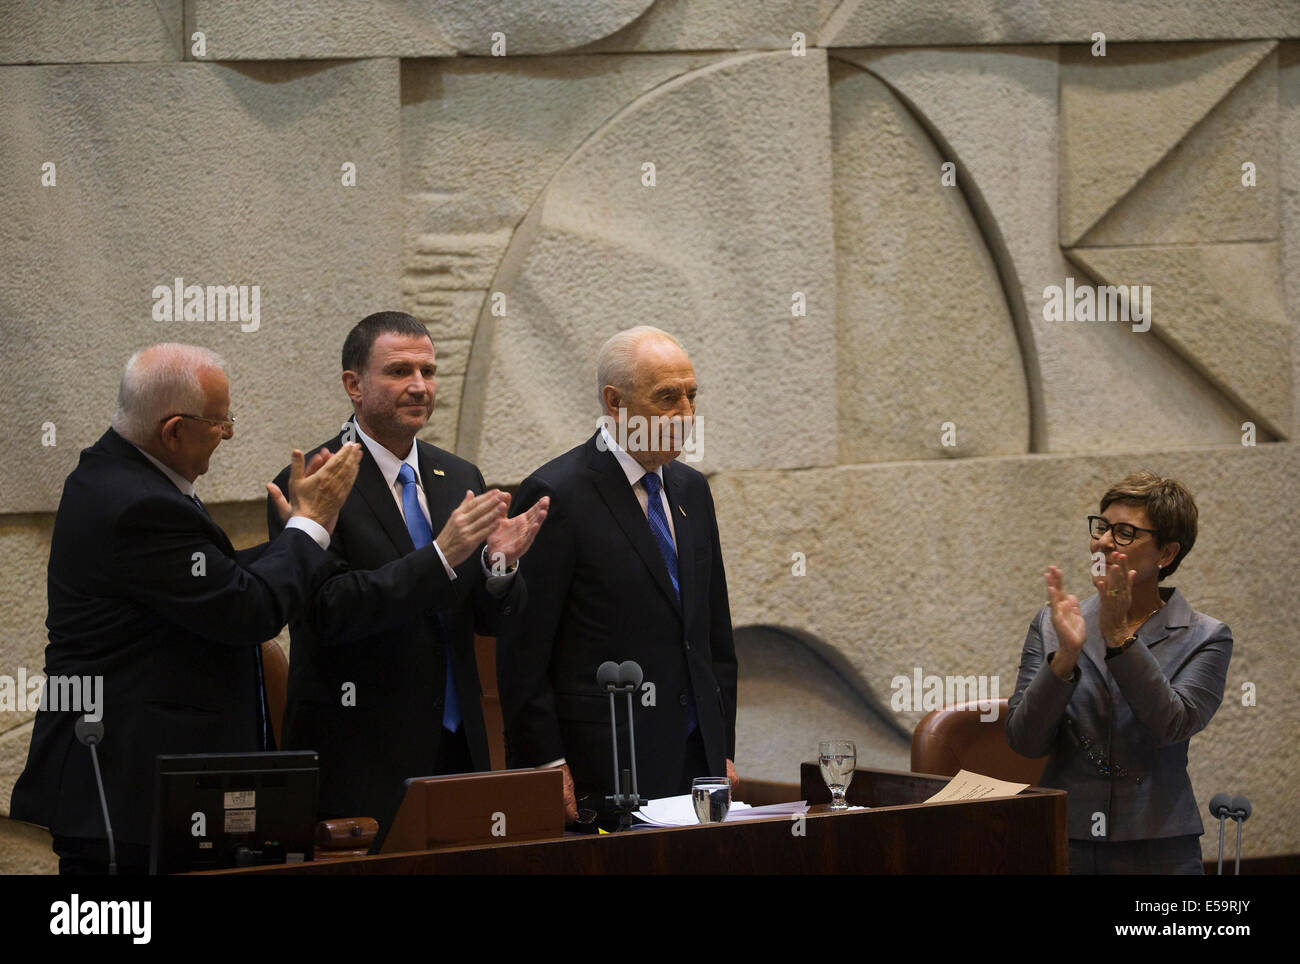 (140724) -- JERUSALEM, July 24, 2014 (Xinhua) -- Outgoing Israeli President Shimon Peres (C) receives respects during Reuven Rivlin (1st L)'s swearing-in ceremony at the Knesset (Israeli parliament) in Jerusalem, on July 24, 2014. Israeli lawmaker Reuven Rivlin was sworn in as the tenth president of Israel on Thursday evening, stepping in the role filled by Shimon Peres for the past seven years.  (Xinhua/POOL/Ronen Zvulun) Stock Photo